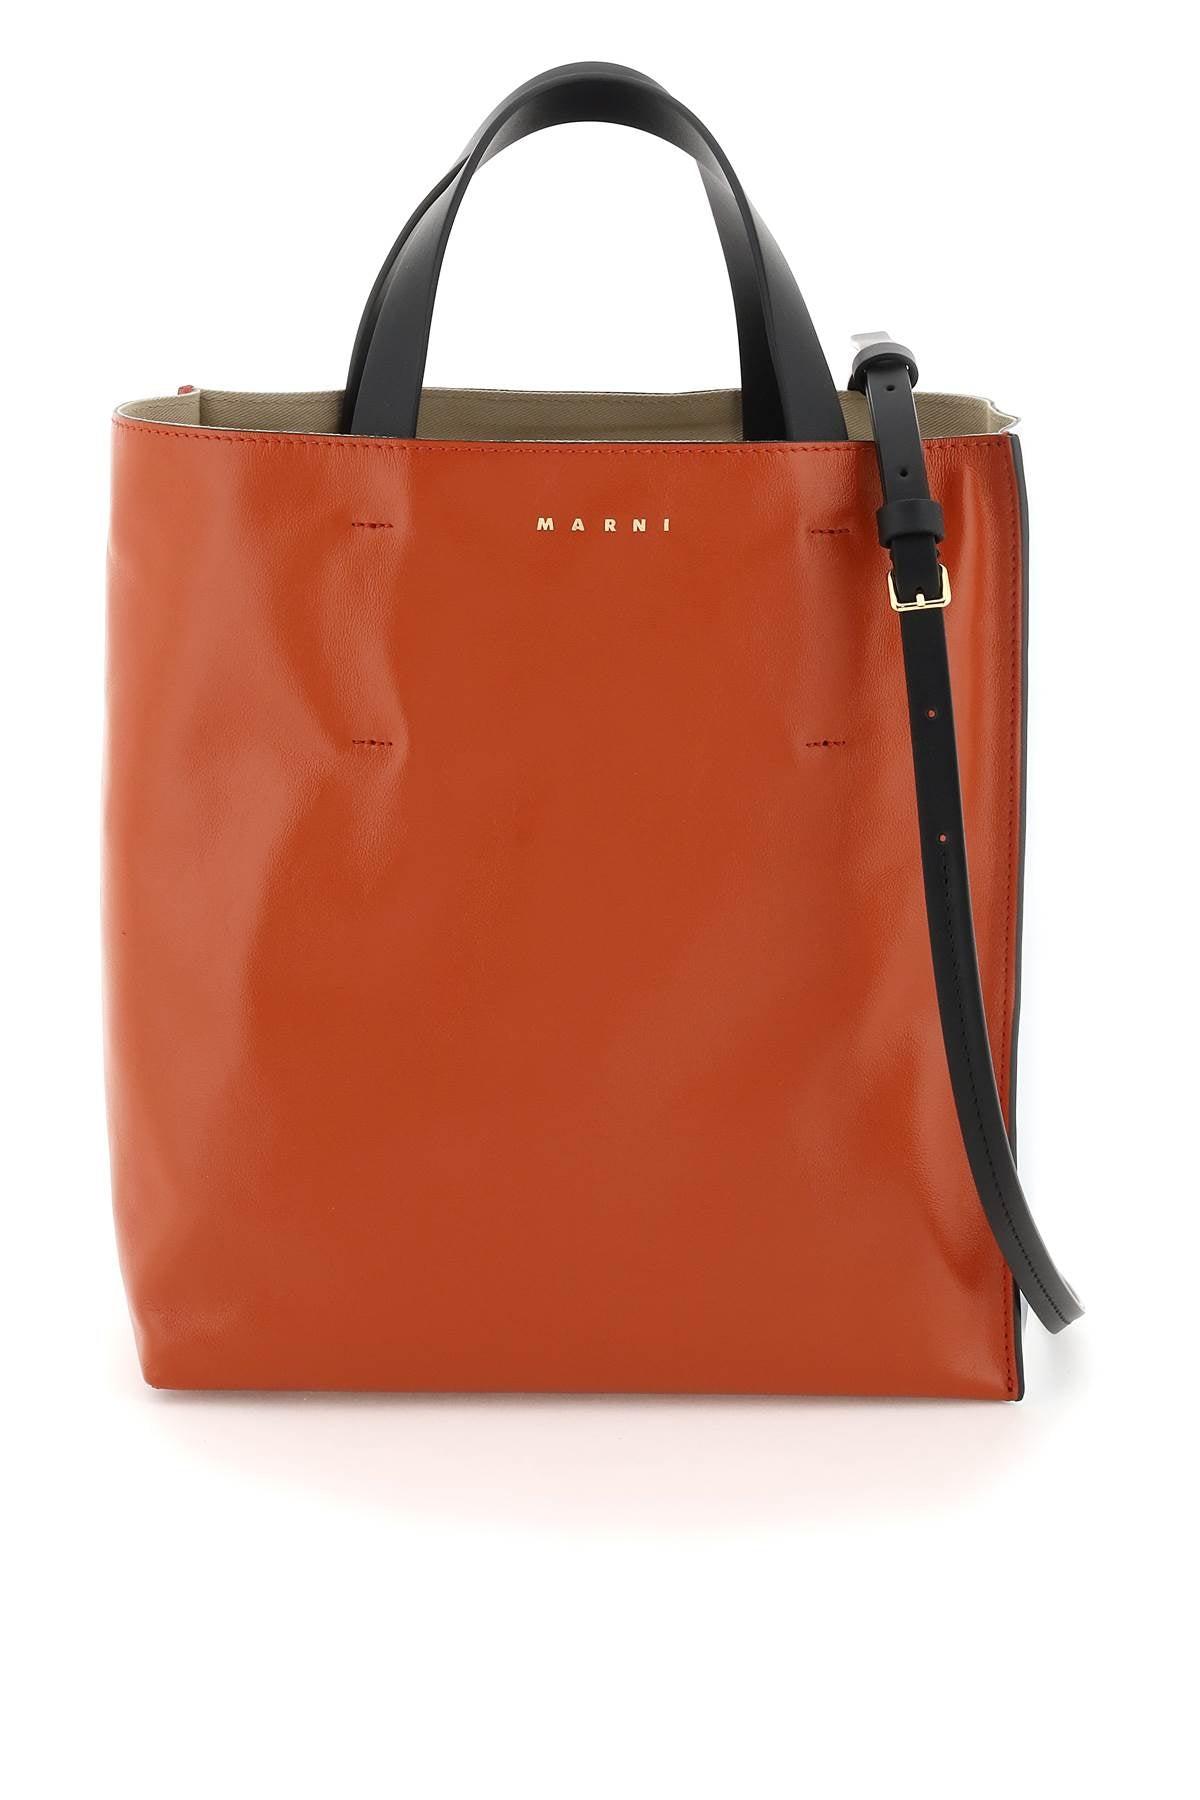 Marni Small Museo Soft Shopping Bag in Orange | Lyst